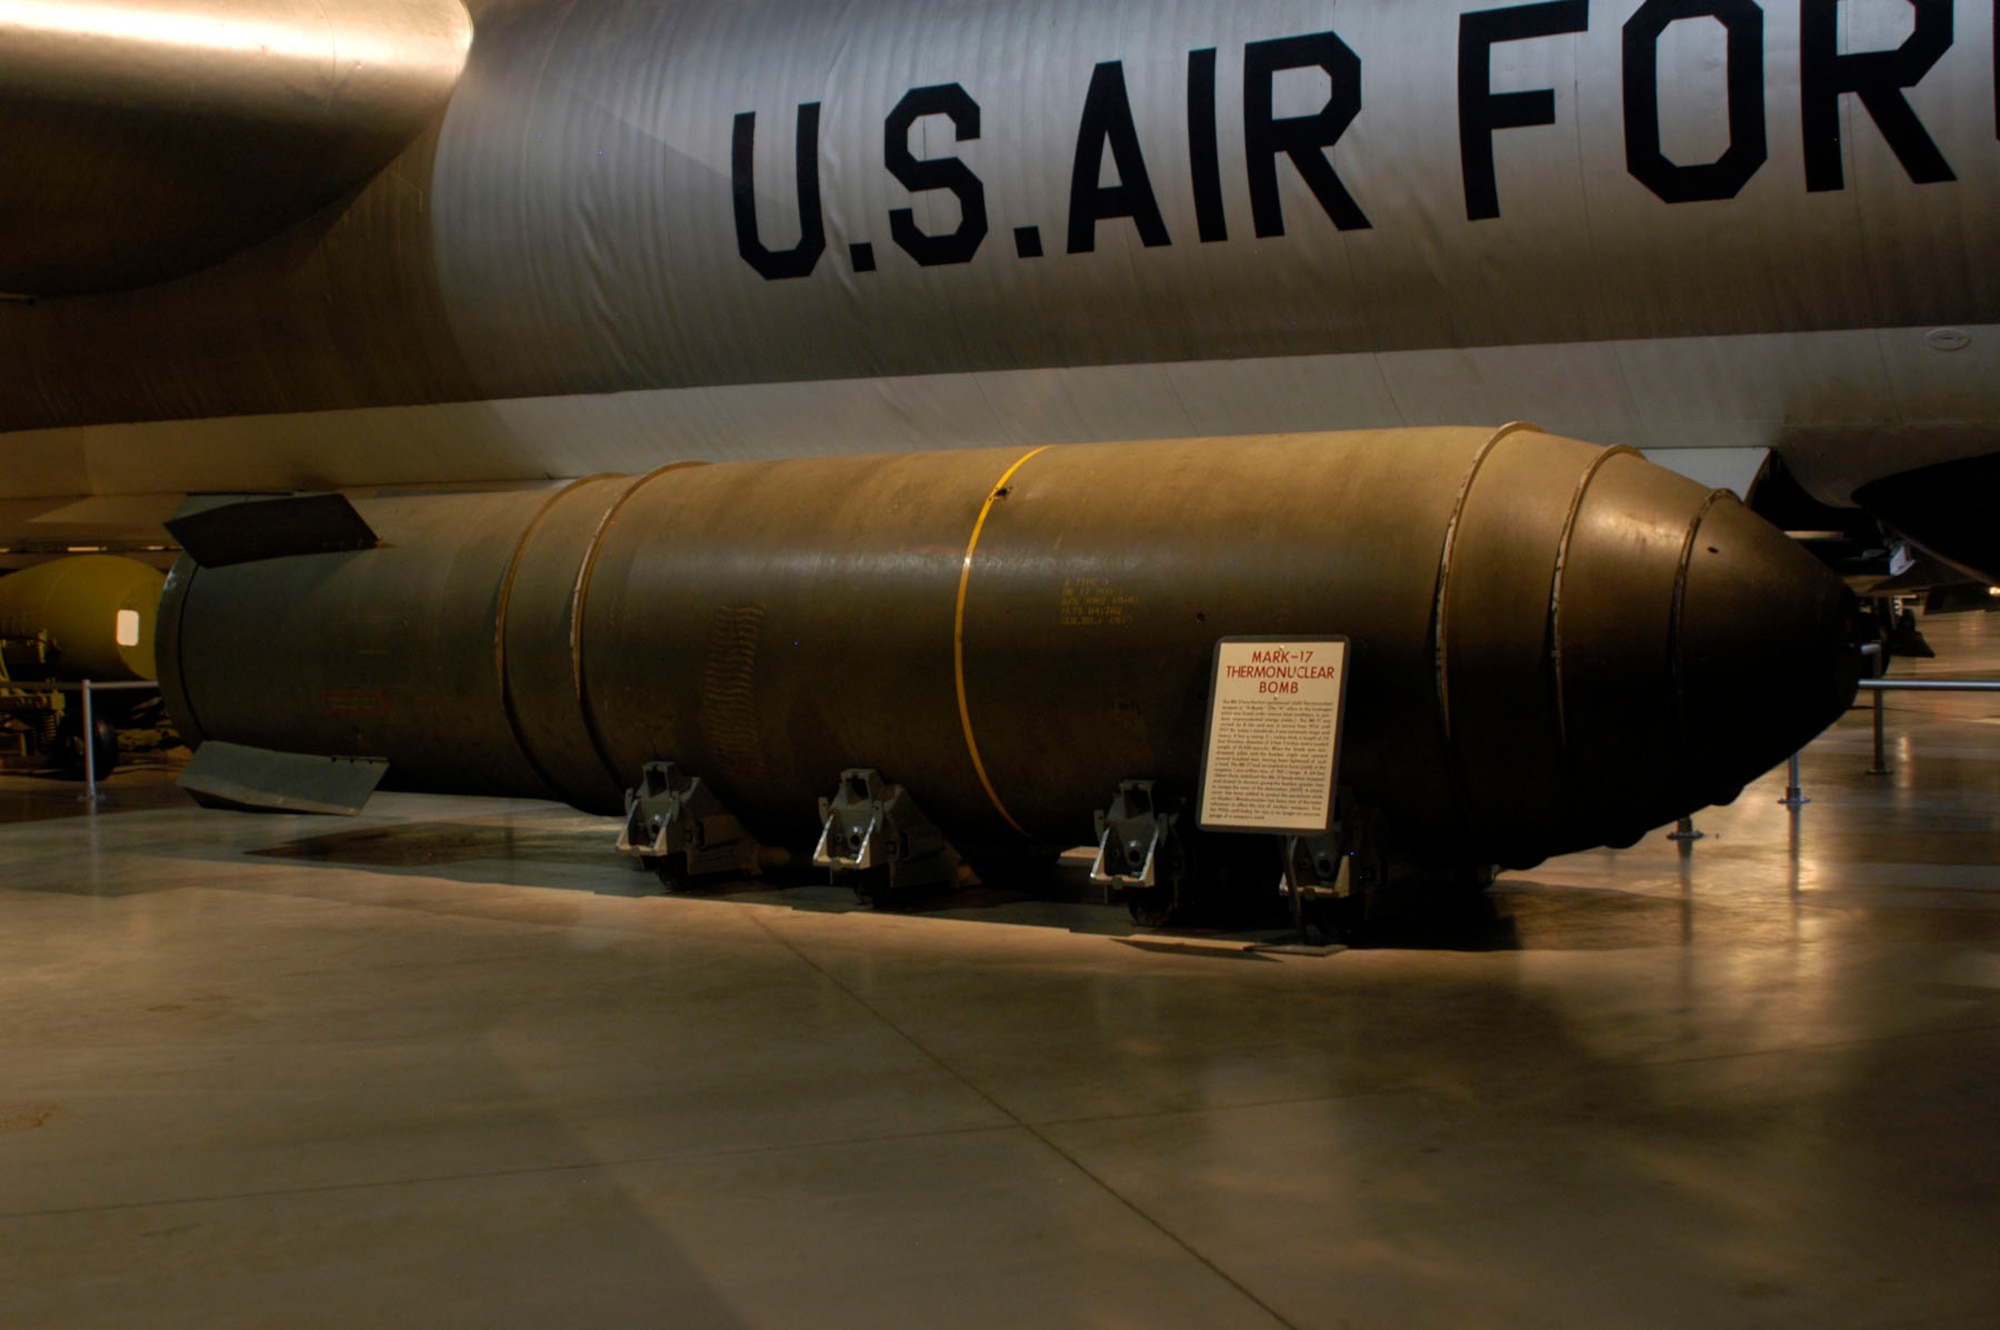 DAYTON, Ohio - The Mark-17 Thermonuclear bomb on display in the Cold War Gallery at the National Museum of the U.S. Air Force. (U.S. Air Force photo)